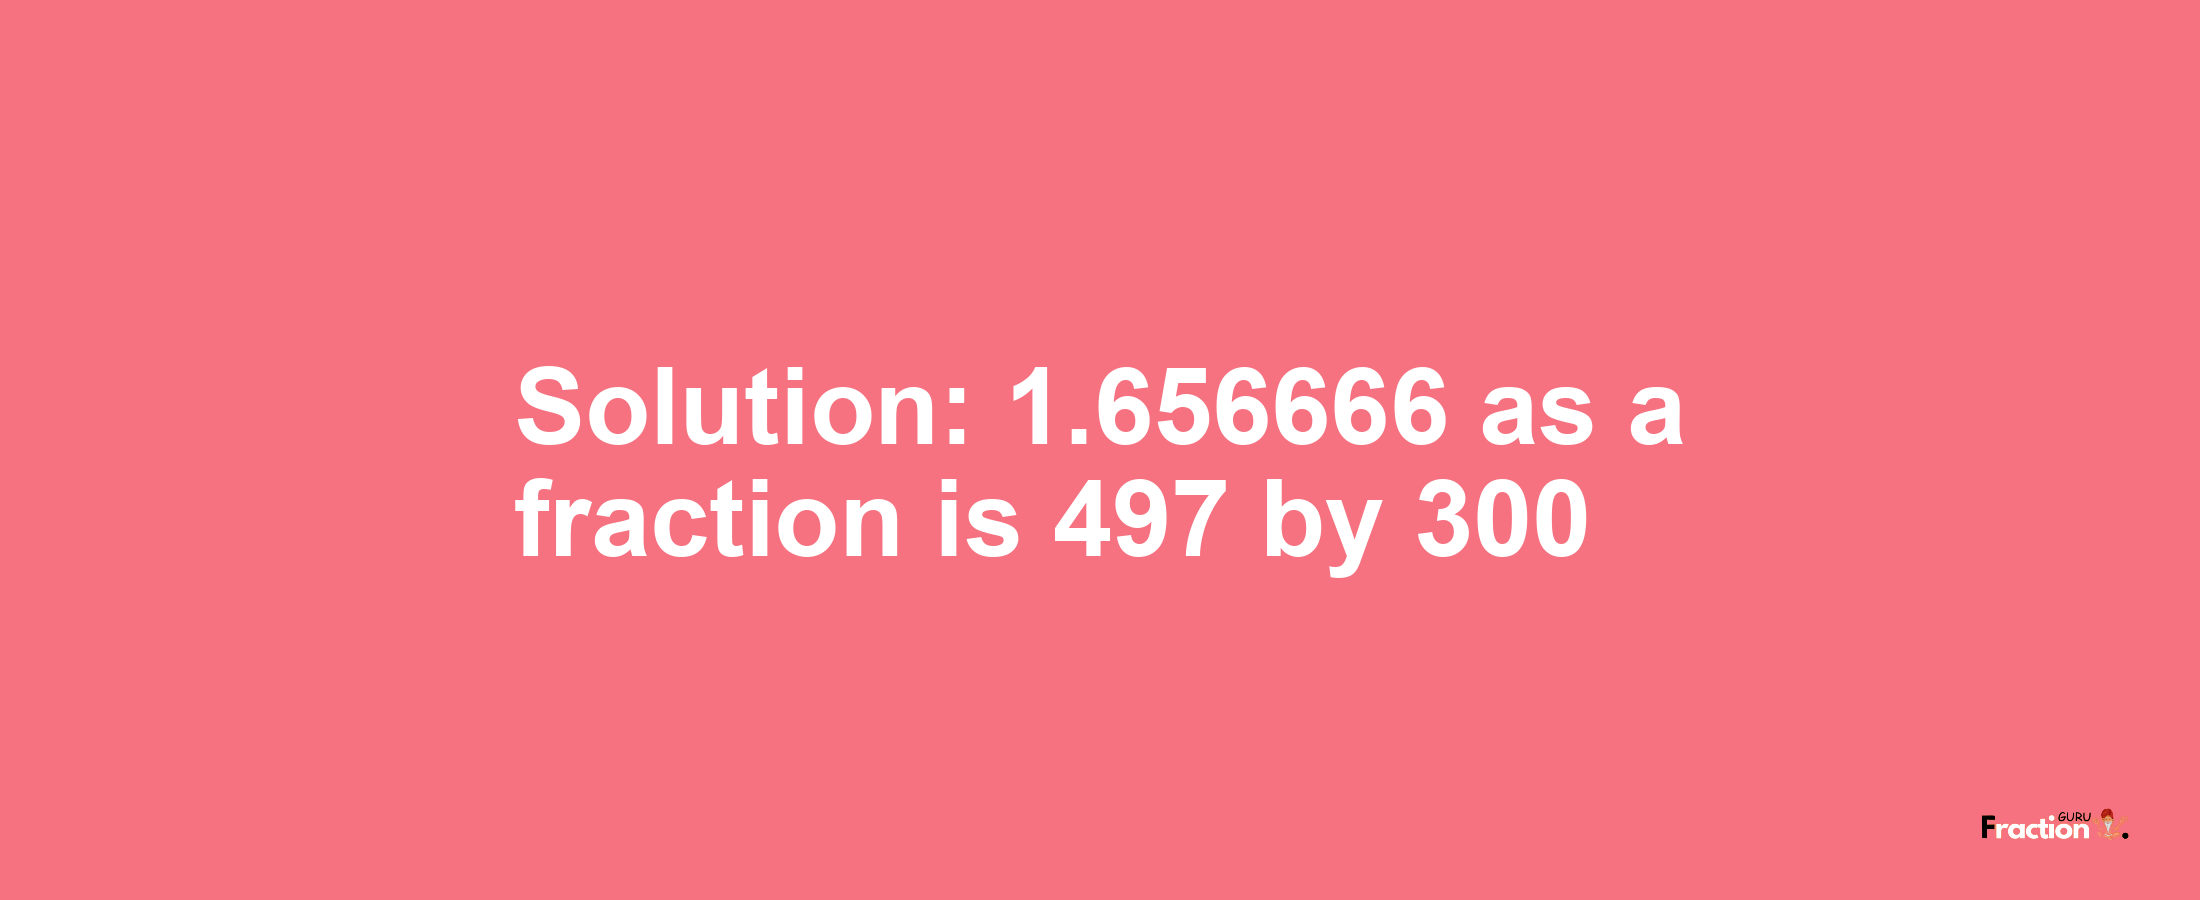 Solution:1.656666 as a fraction is 497/300